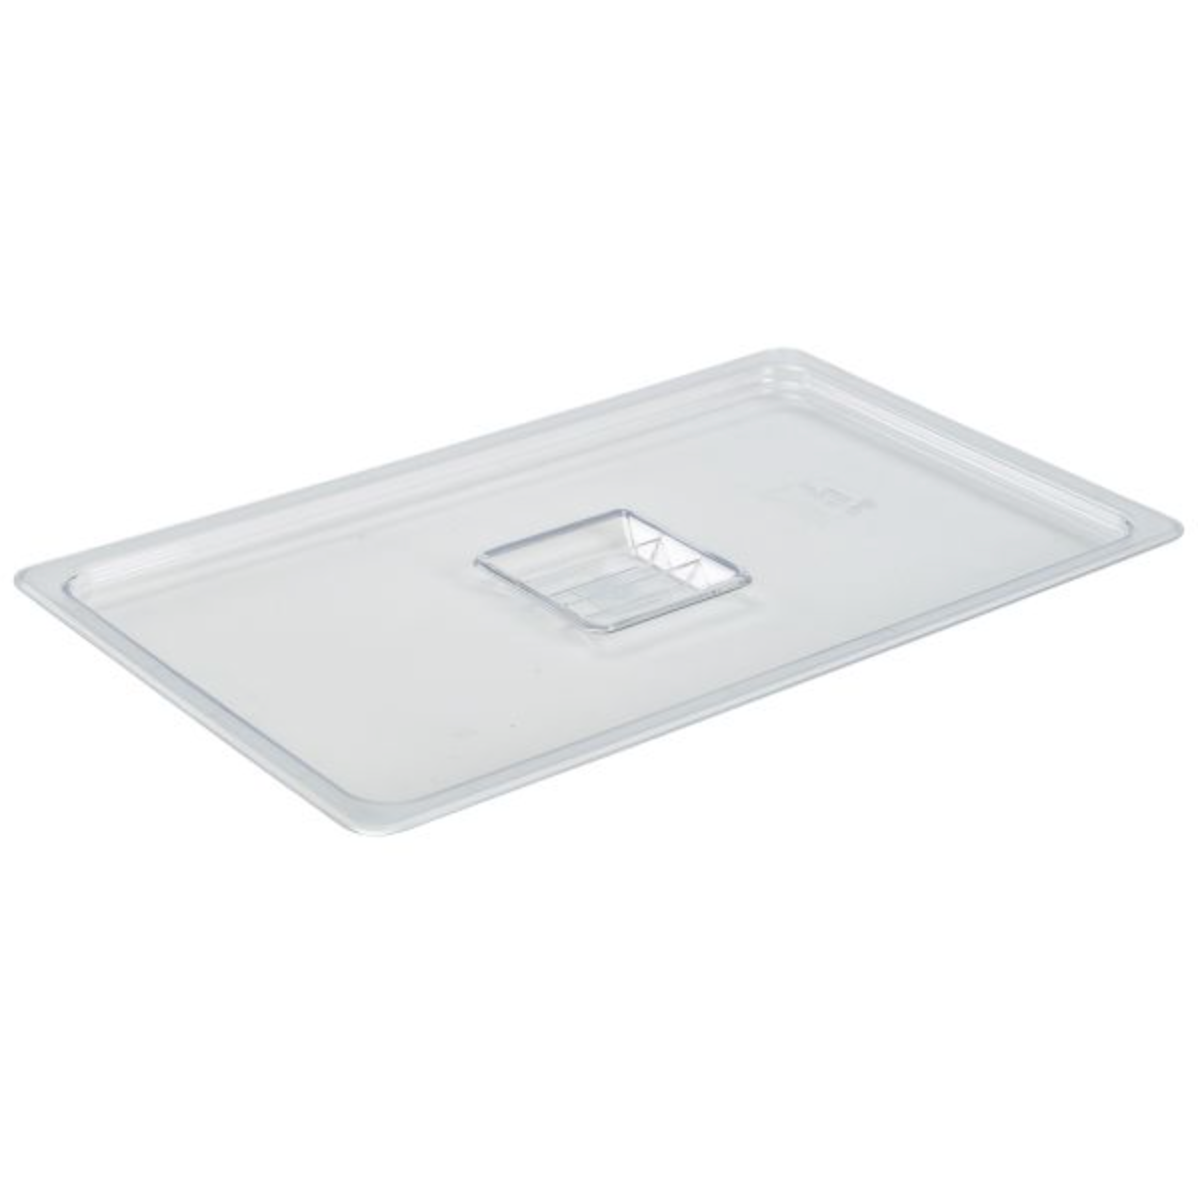 GenWare 1/1 Polycarbonate GN Lid Clear